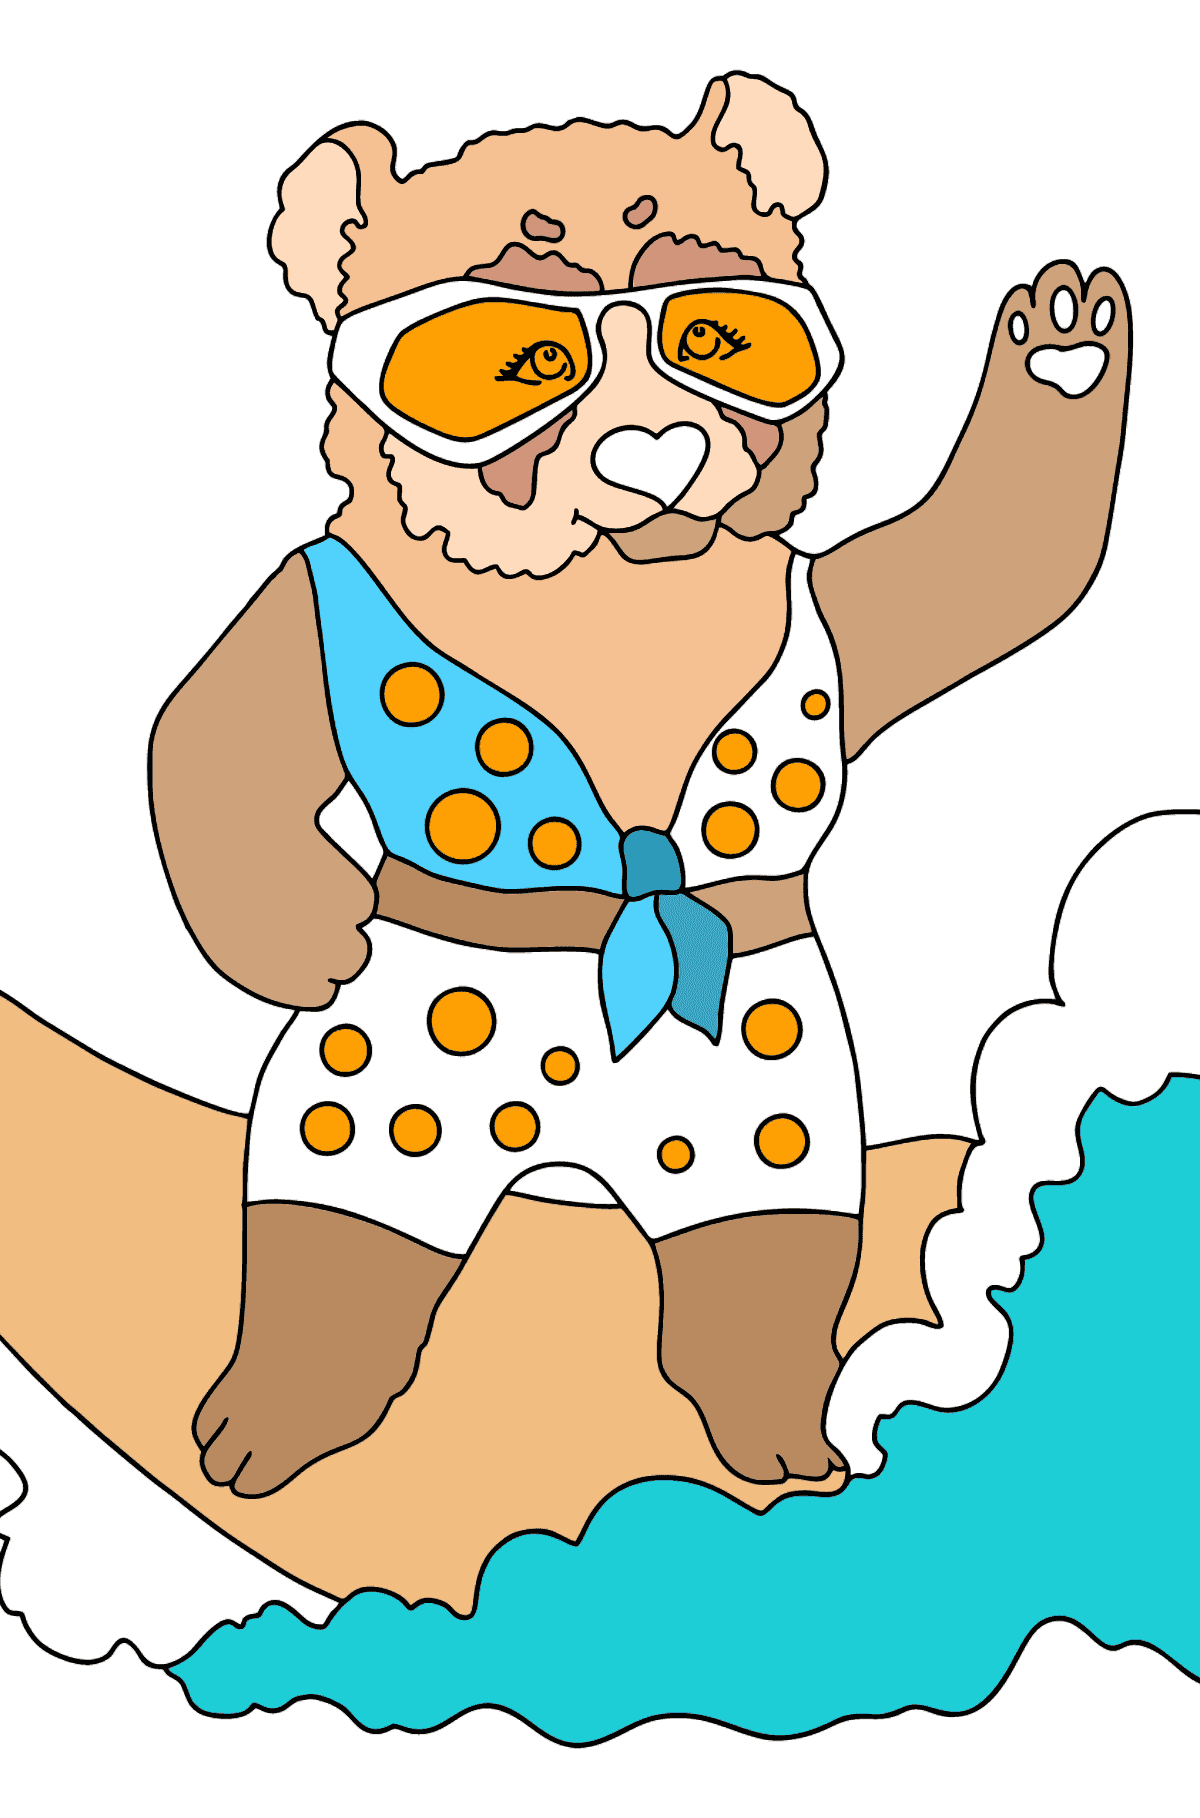 Coloring Page - A Panda is Catching a Wave - Coloring Pages for Kids